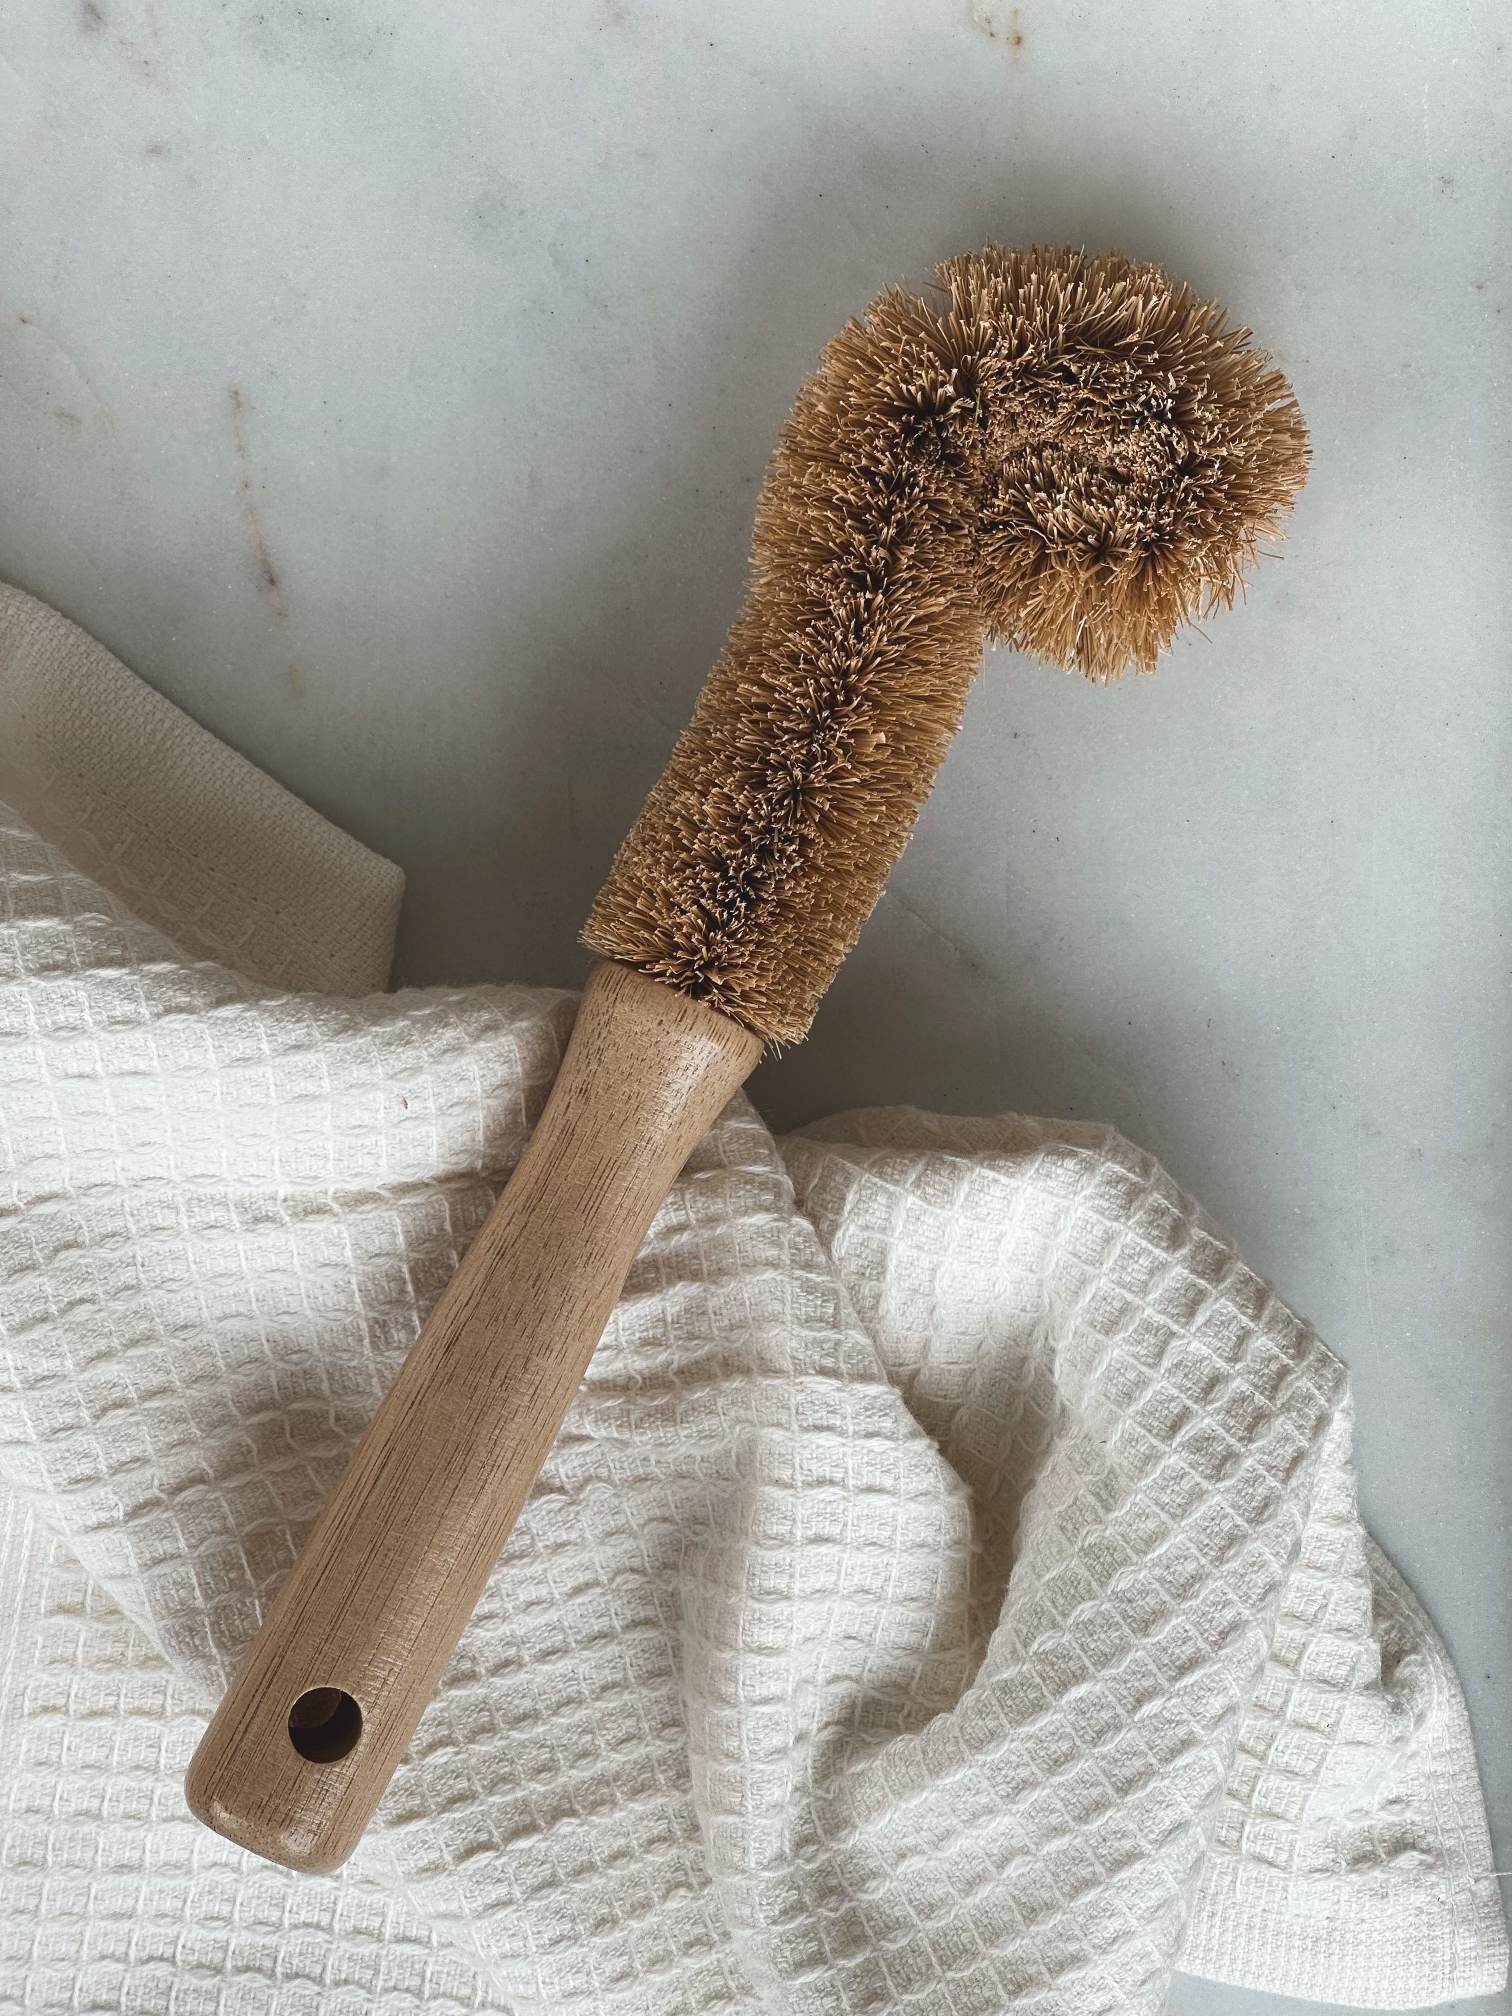 Coconut fiber bottle brush displayed with an ivory towel.